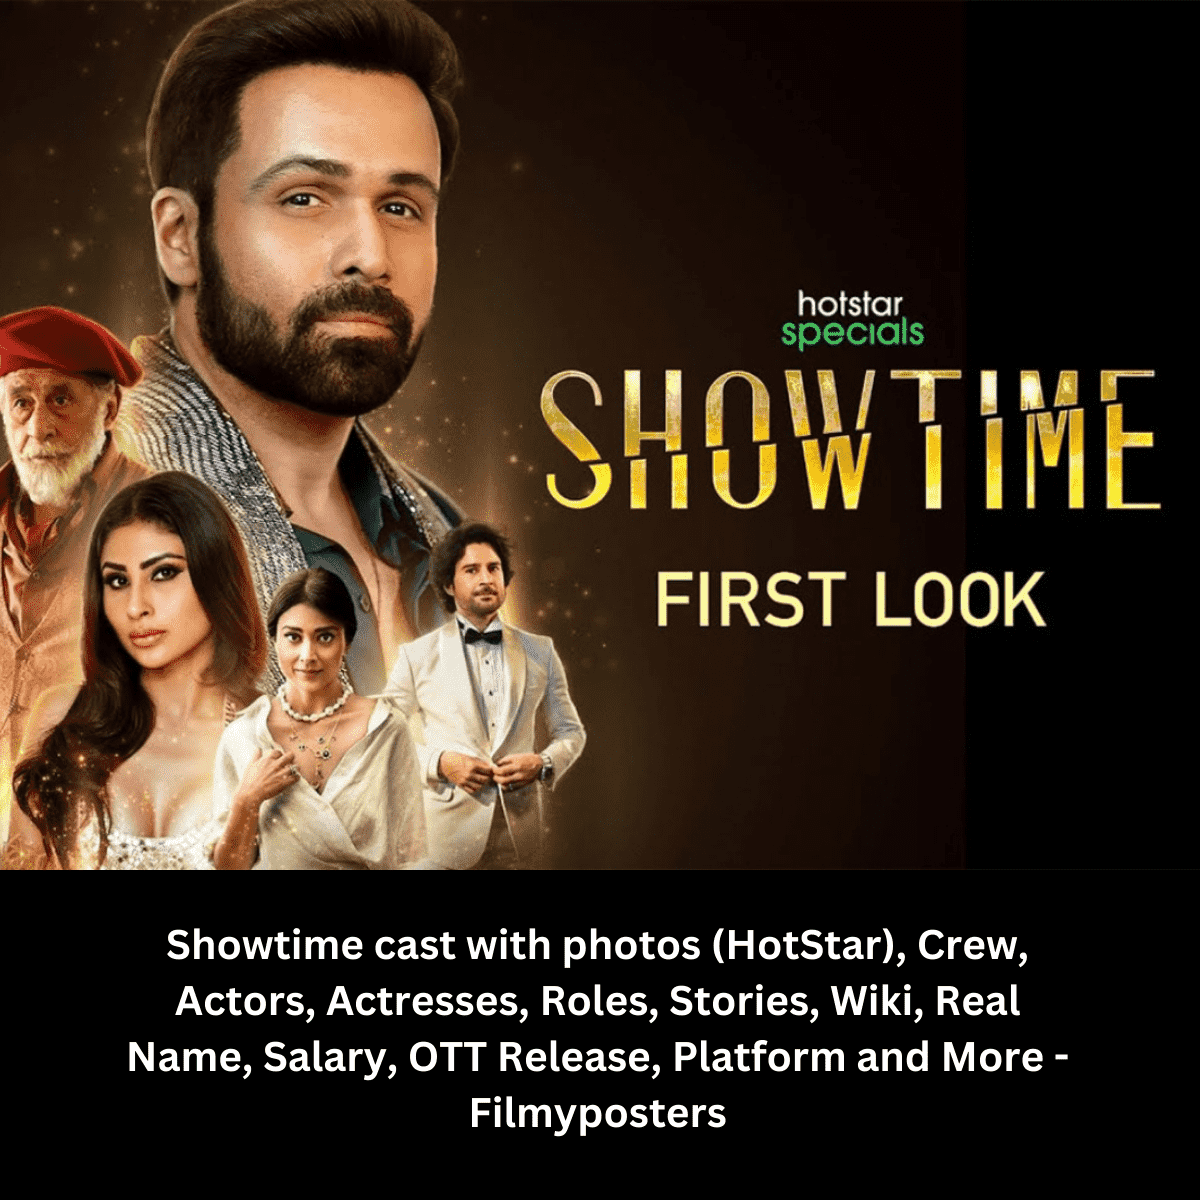 Showtime cast with photos (HotStar), Crew, Actors, Actresses, Roles, Stories, Wiki, Real Name, Salary, OTT Release, Platform and More - Filmyposters